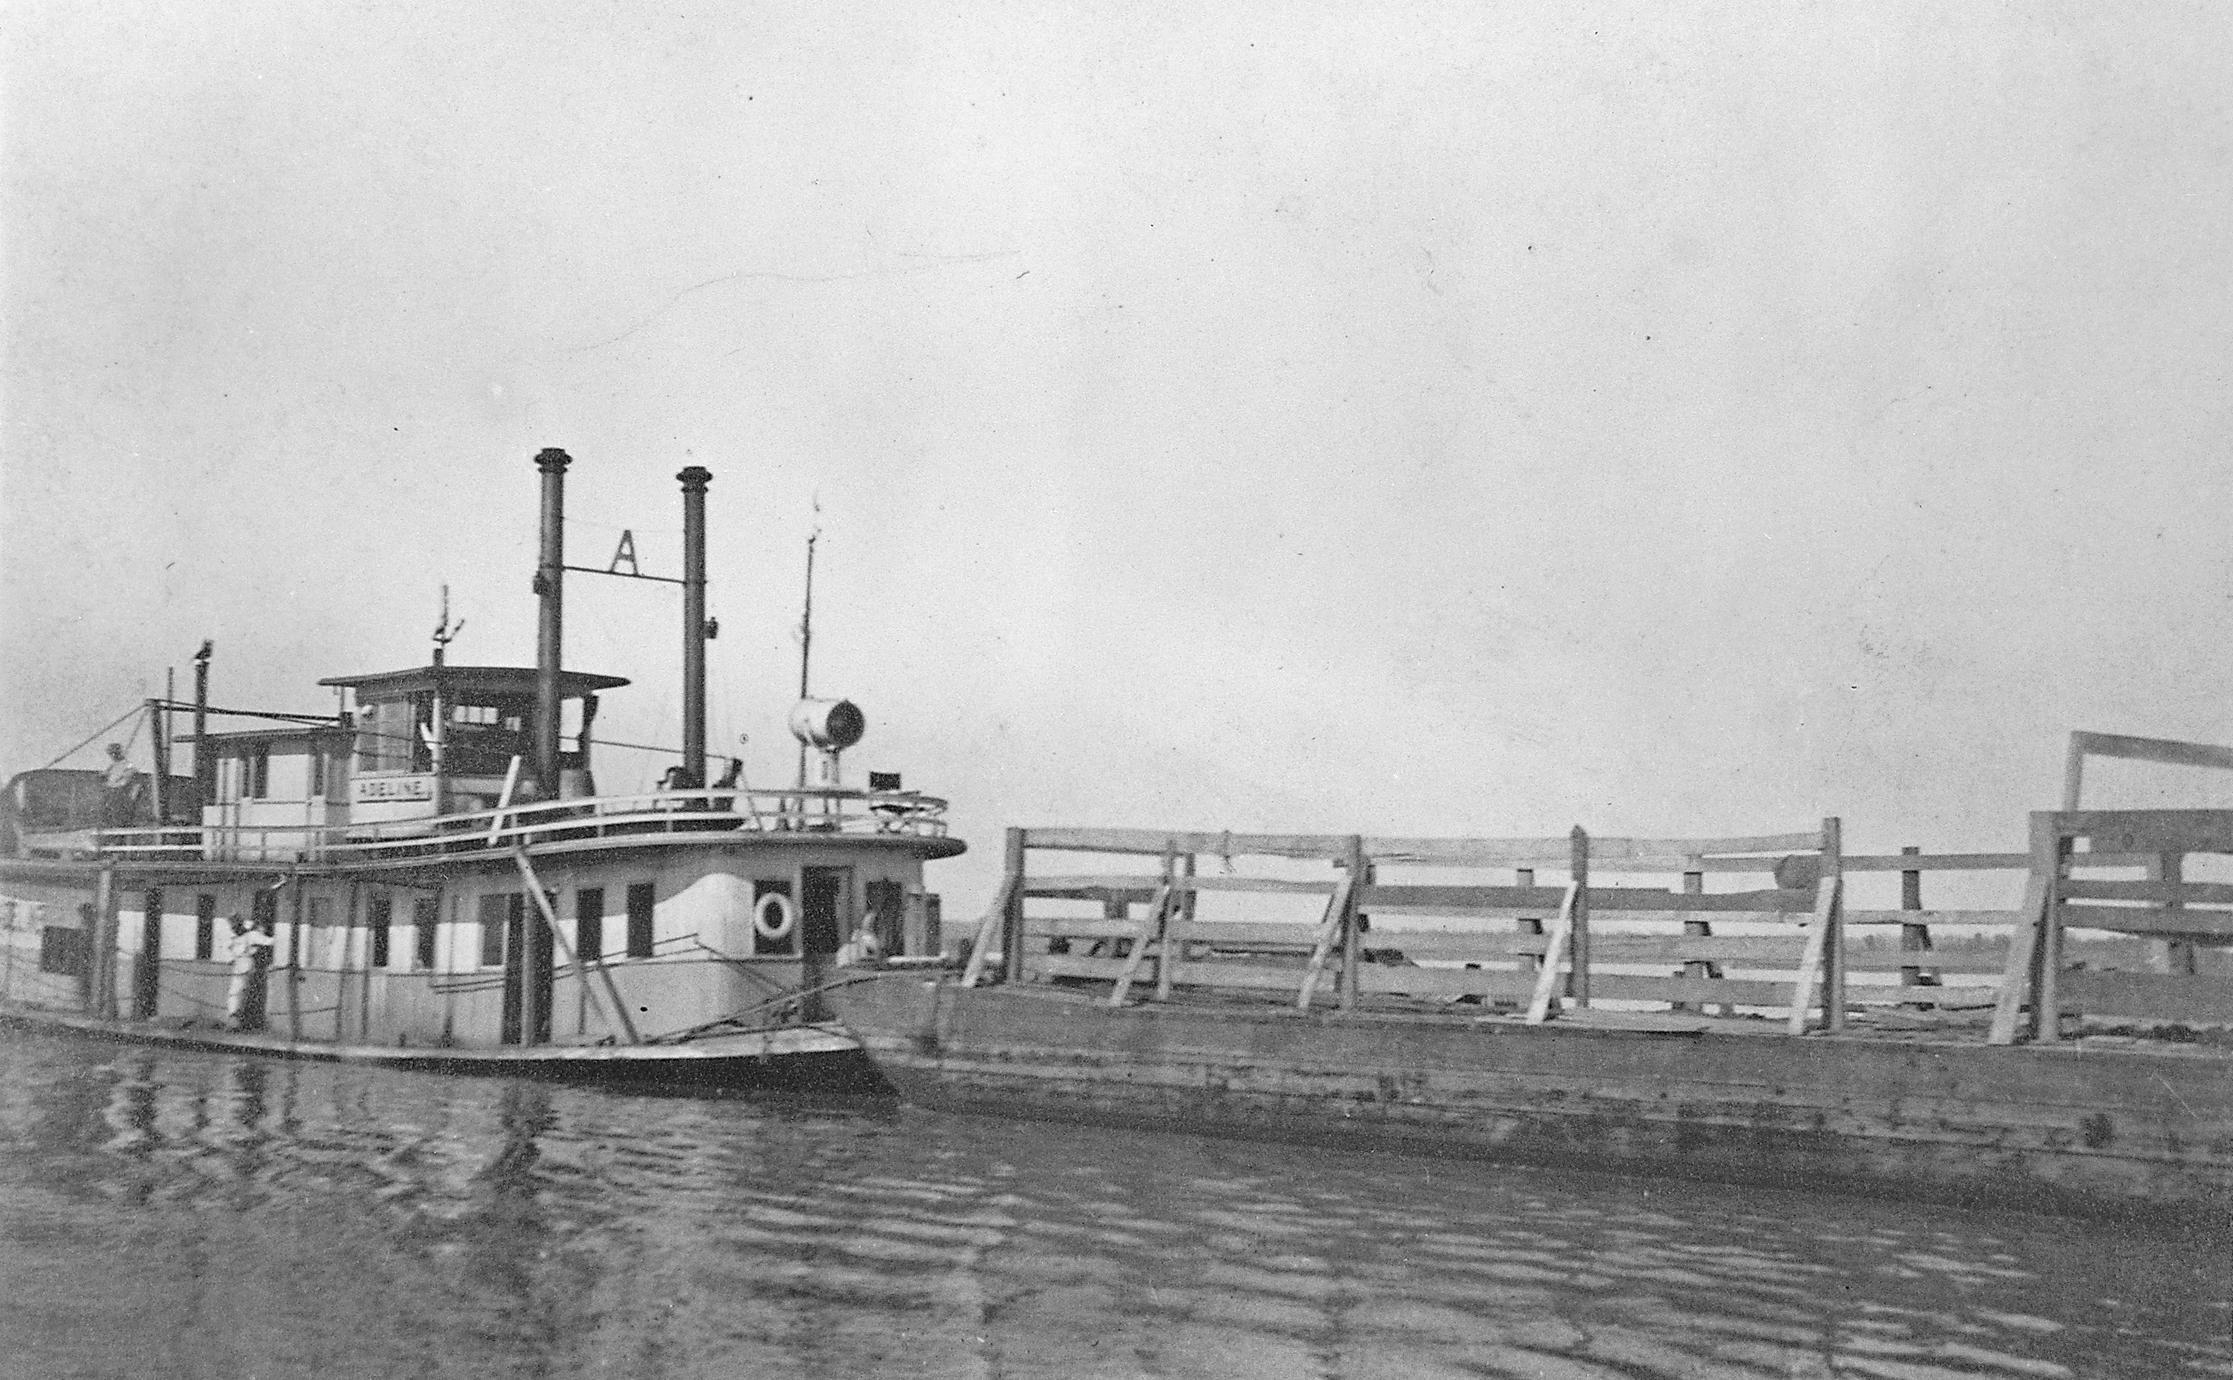 Adeline (Packet, Towboat, 1910-1913)